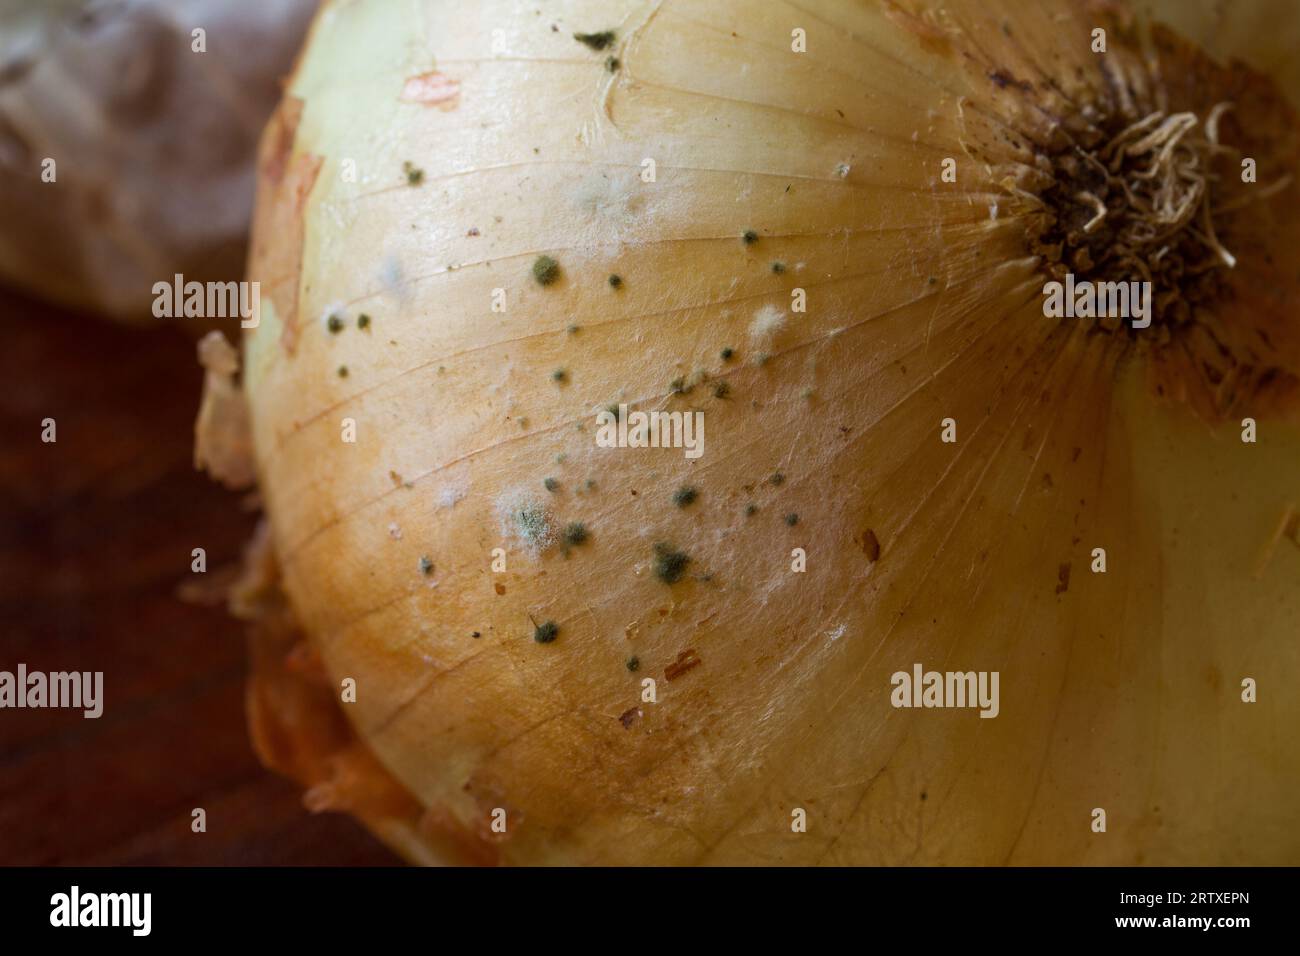 Photograph of white onions in a state of decomposition with mushrooms. Food concept. Stock Photo